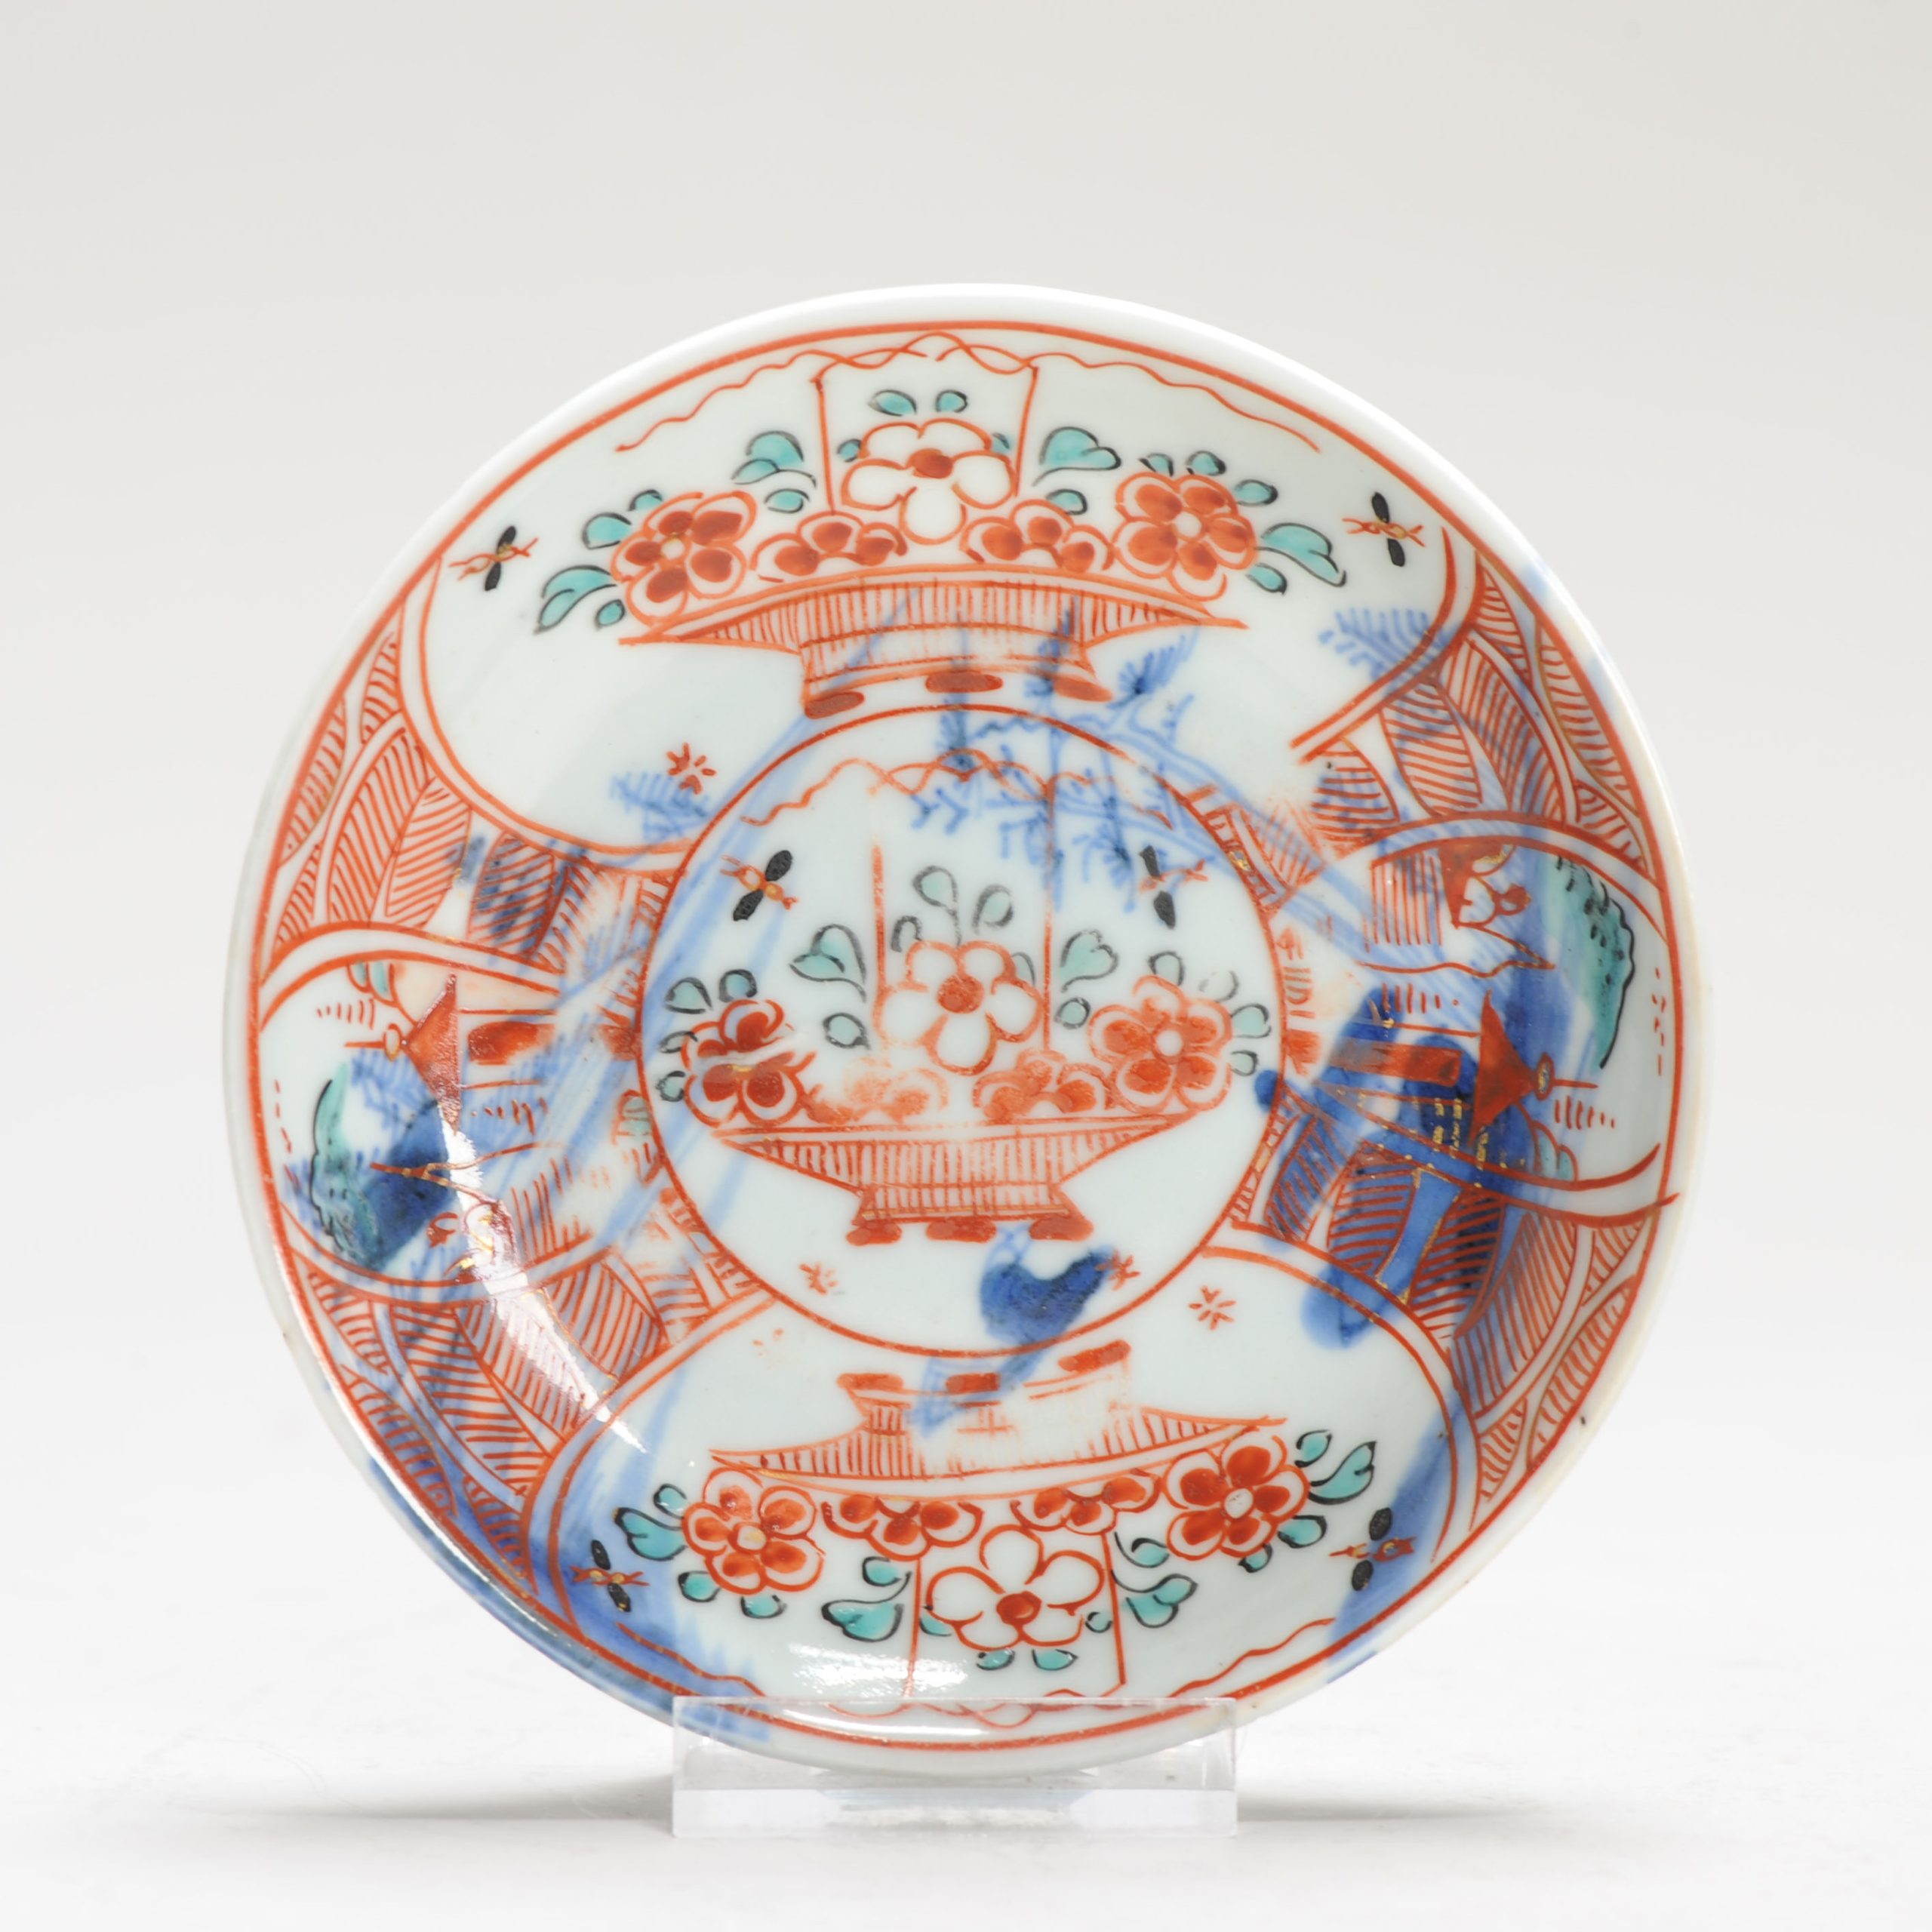 1223 A Lovely Saucer. Painted in Europe on a Chinese blue and white landscape dish. Amsterdam Bont